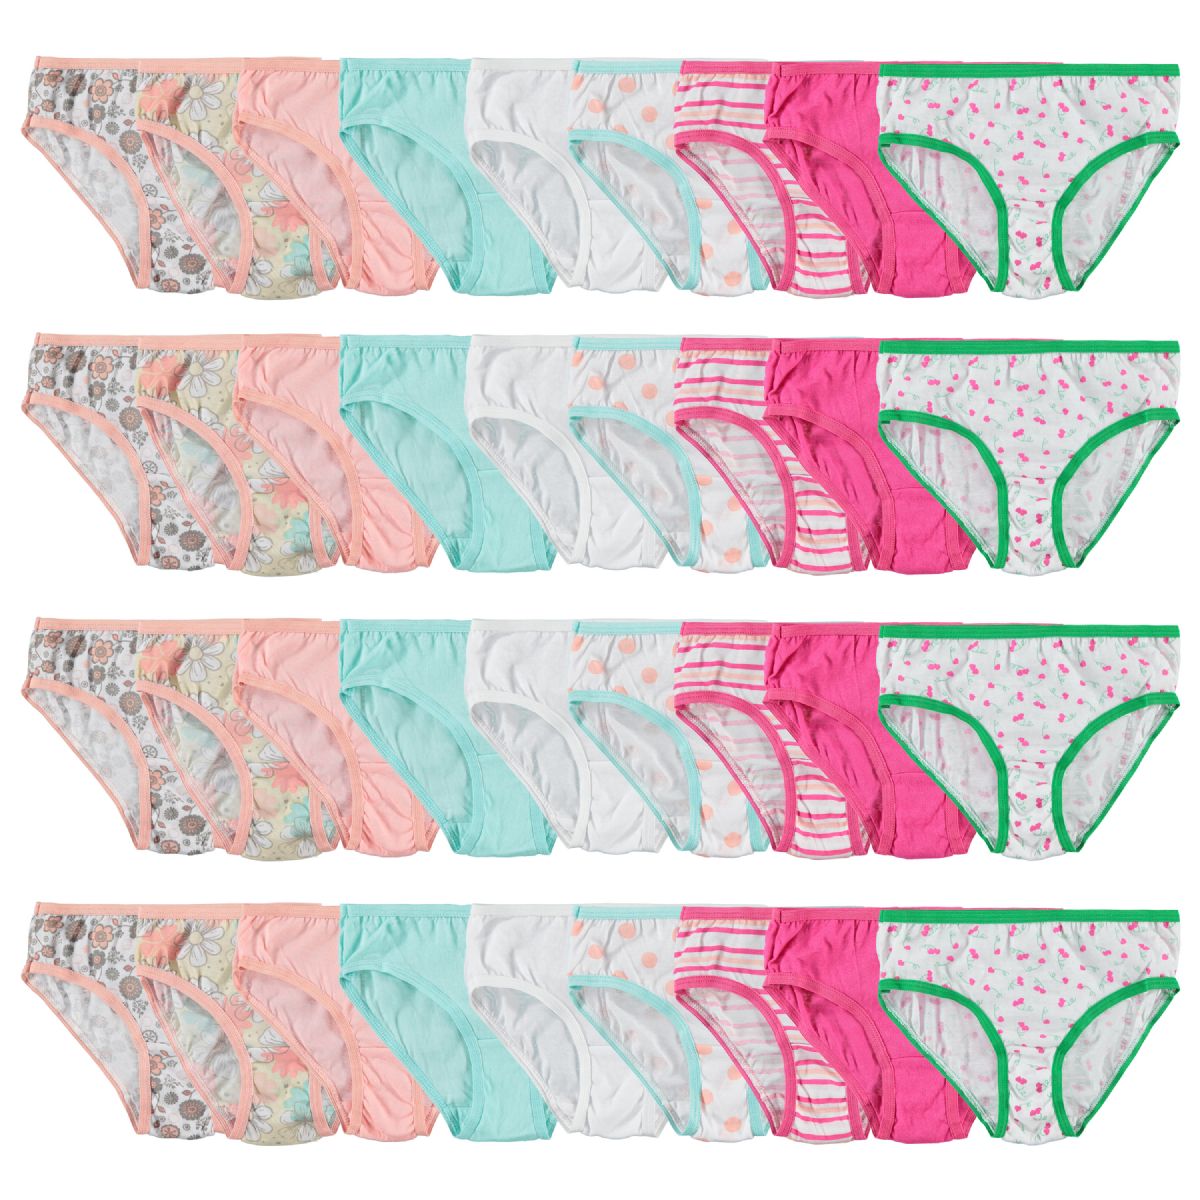 Wholesale Girls' Panties - 5 Pack, Assorted, Sizes 2T-3T